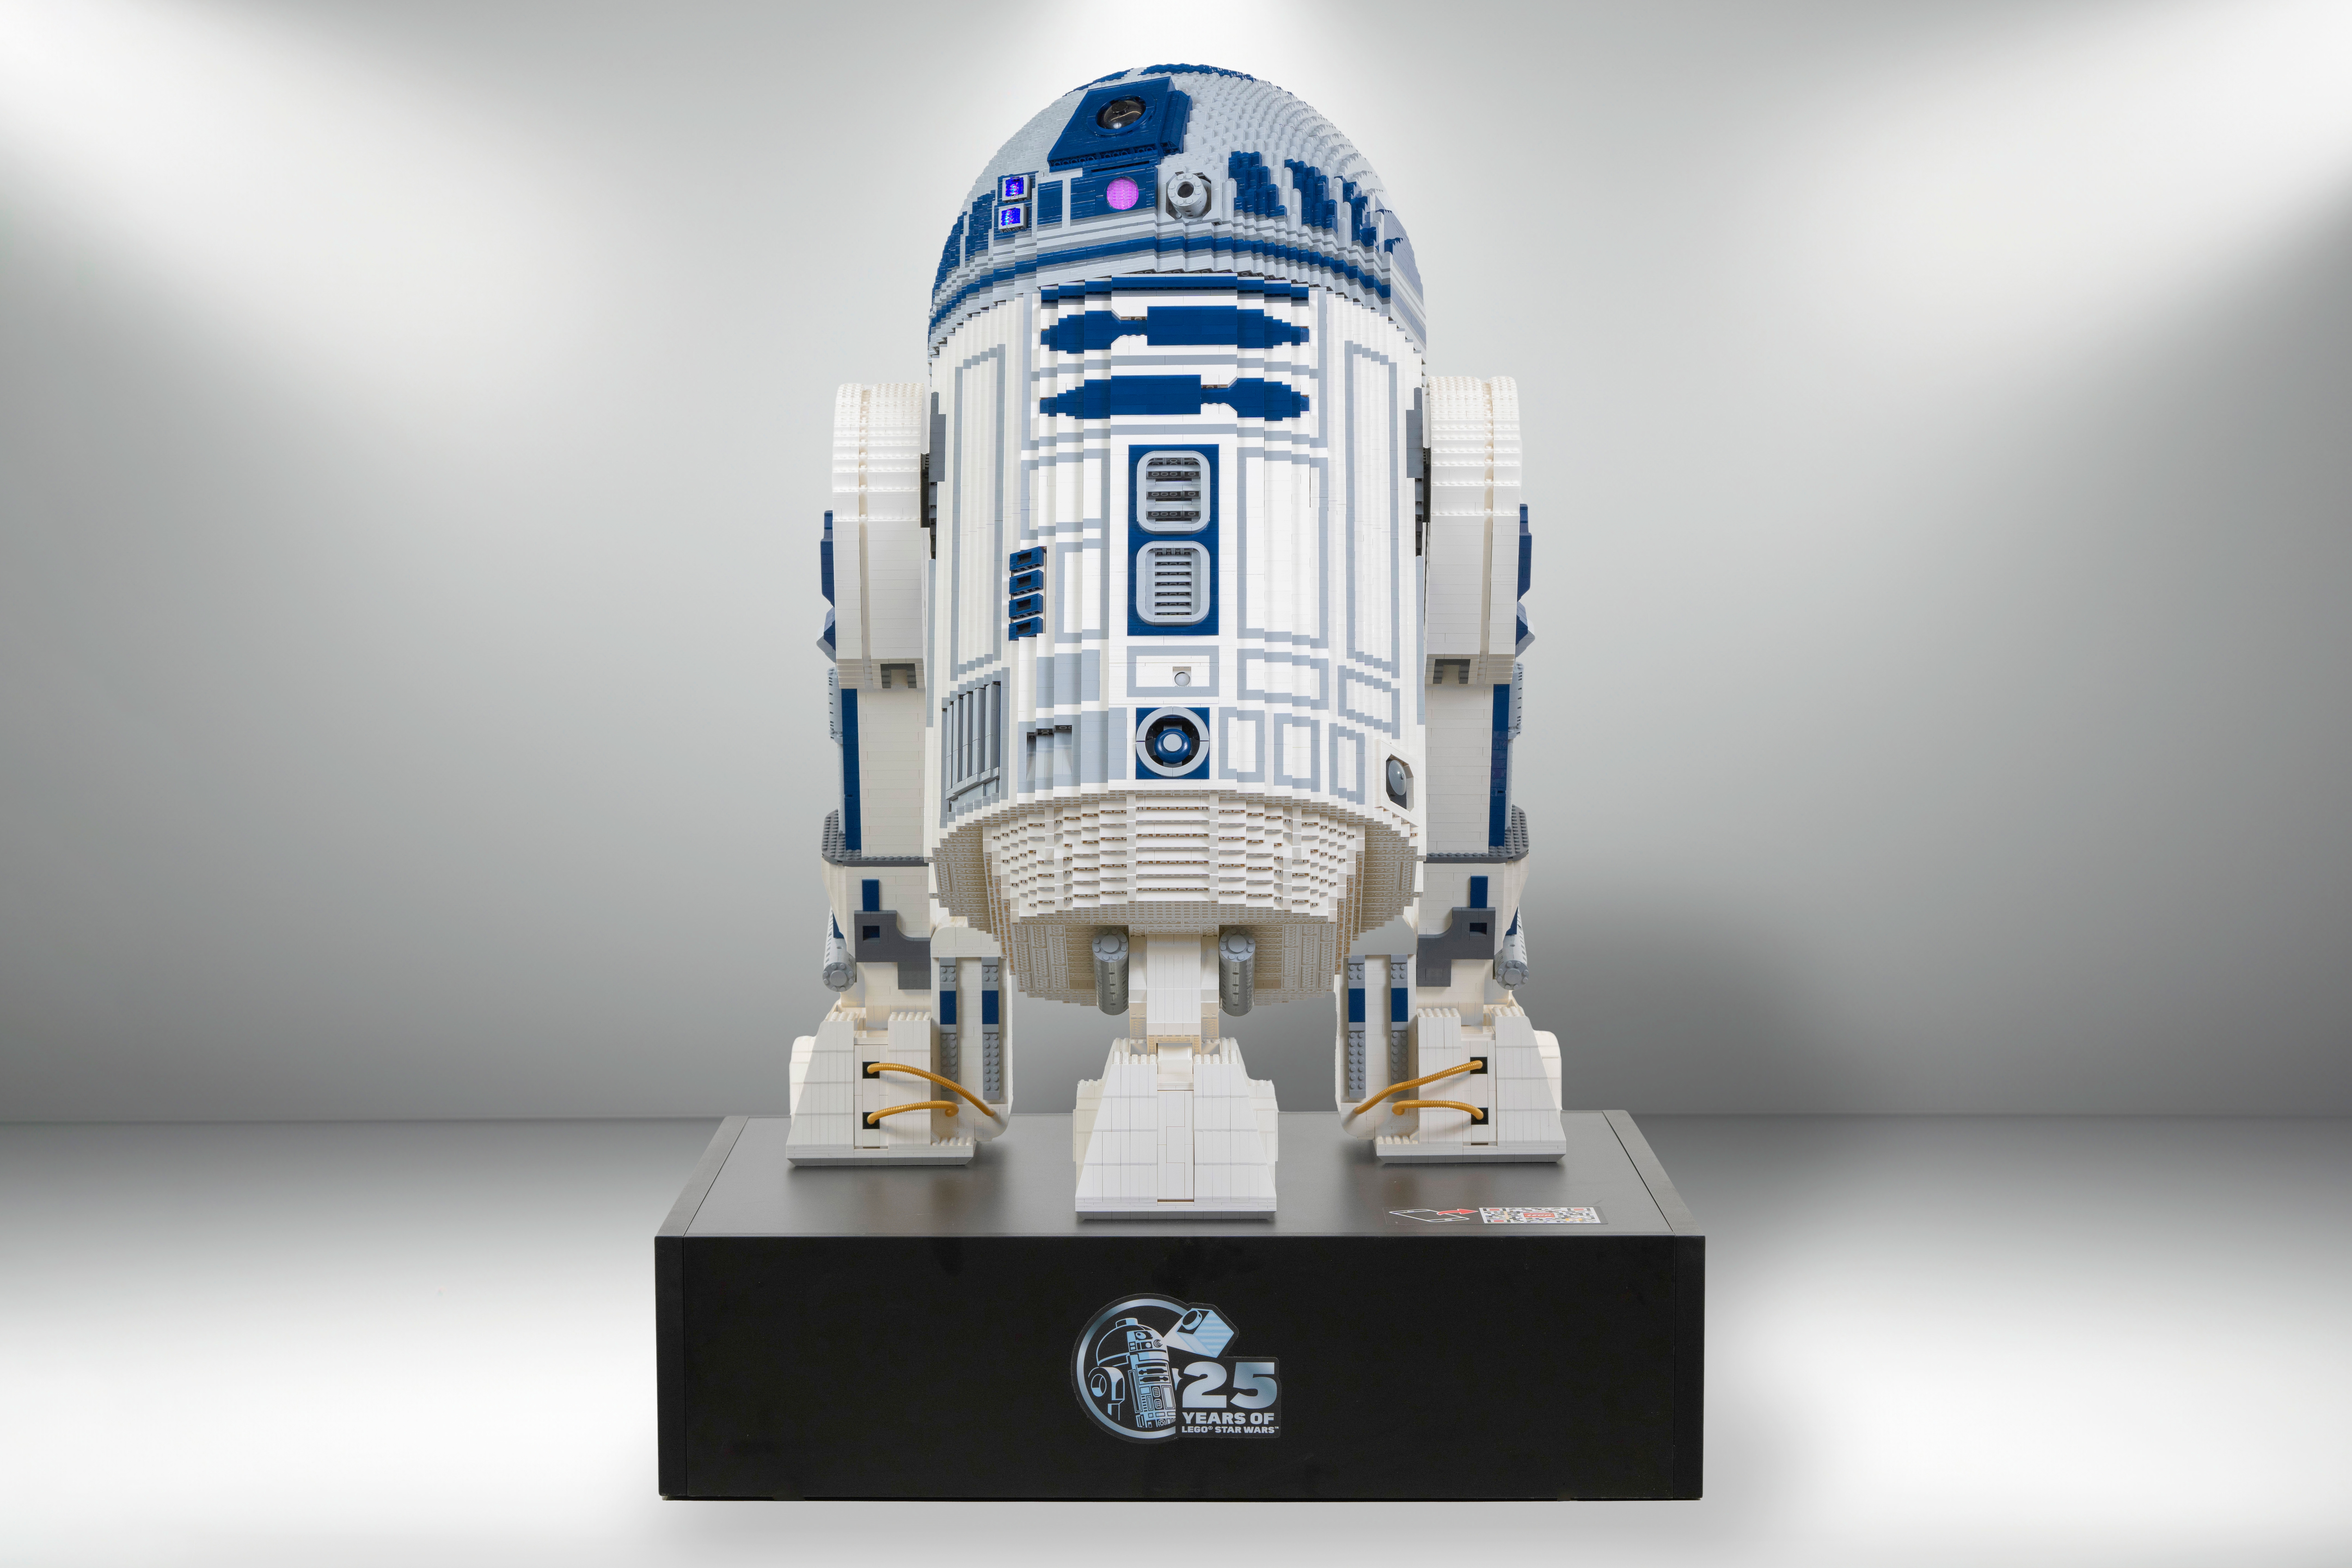 Lego unveils its biggest and best R2-D2 set in time for May the